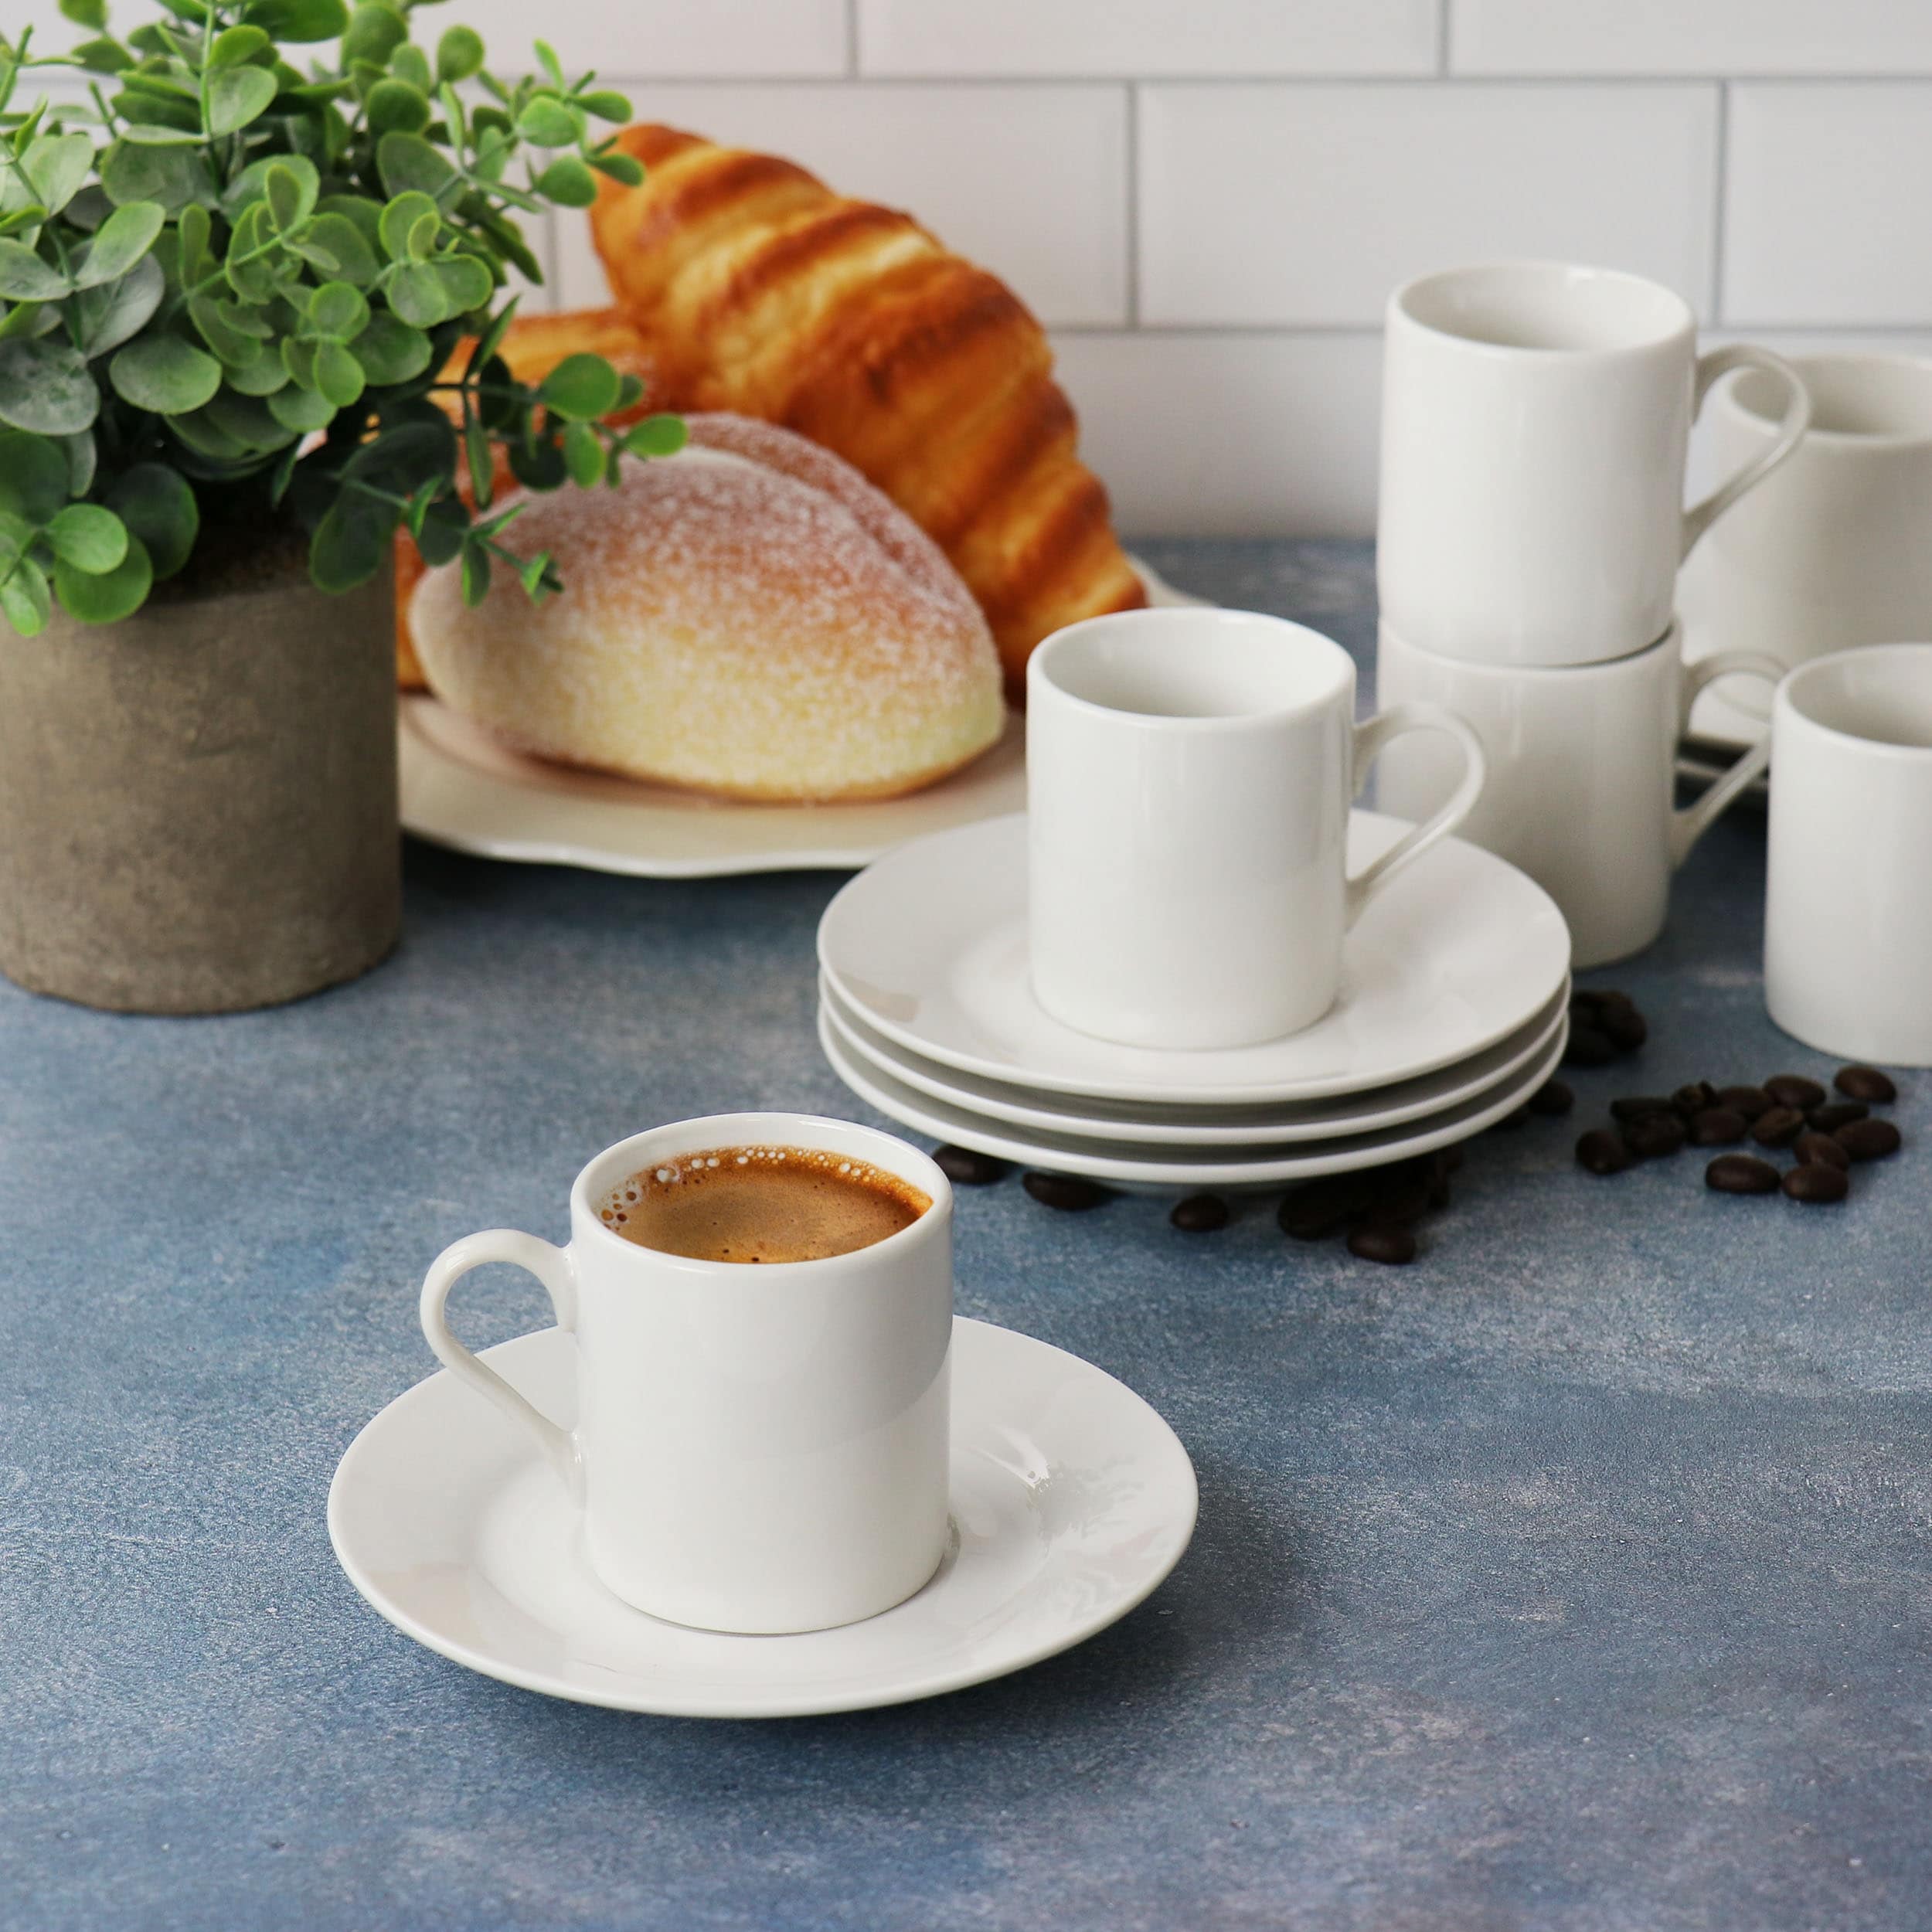 https://ak1.ostkcdn.com/images/products/is/images/direct/ccb1bde925c6159b5796c45b28d9160853591994/Fine-Ceramic-6-Piece-Espresso-Demi-Cup-and-Saucer-Set-in-White.jpg